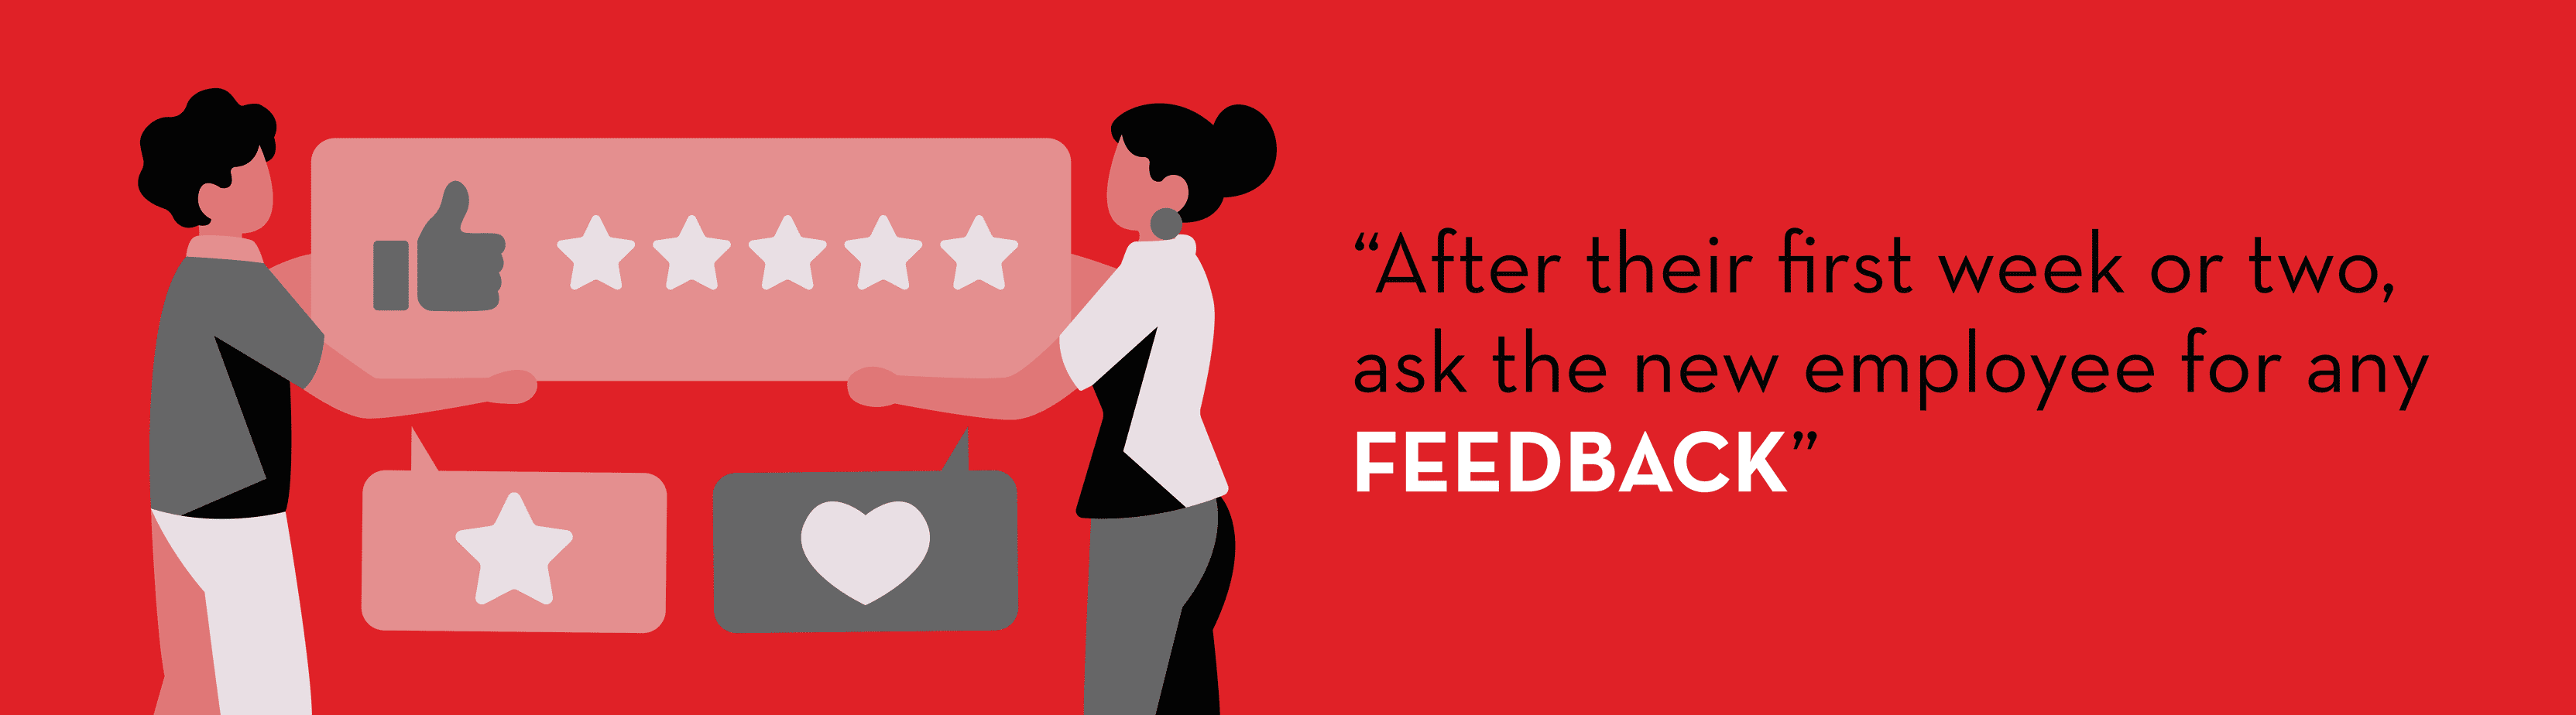 After their first week or two, ask the new employee for any feedback for Employee Onboarding Process